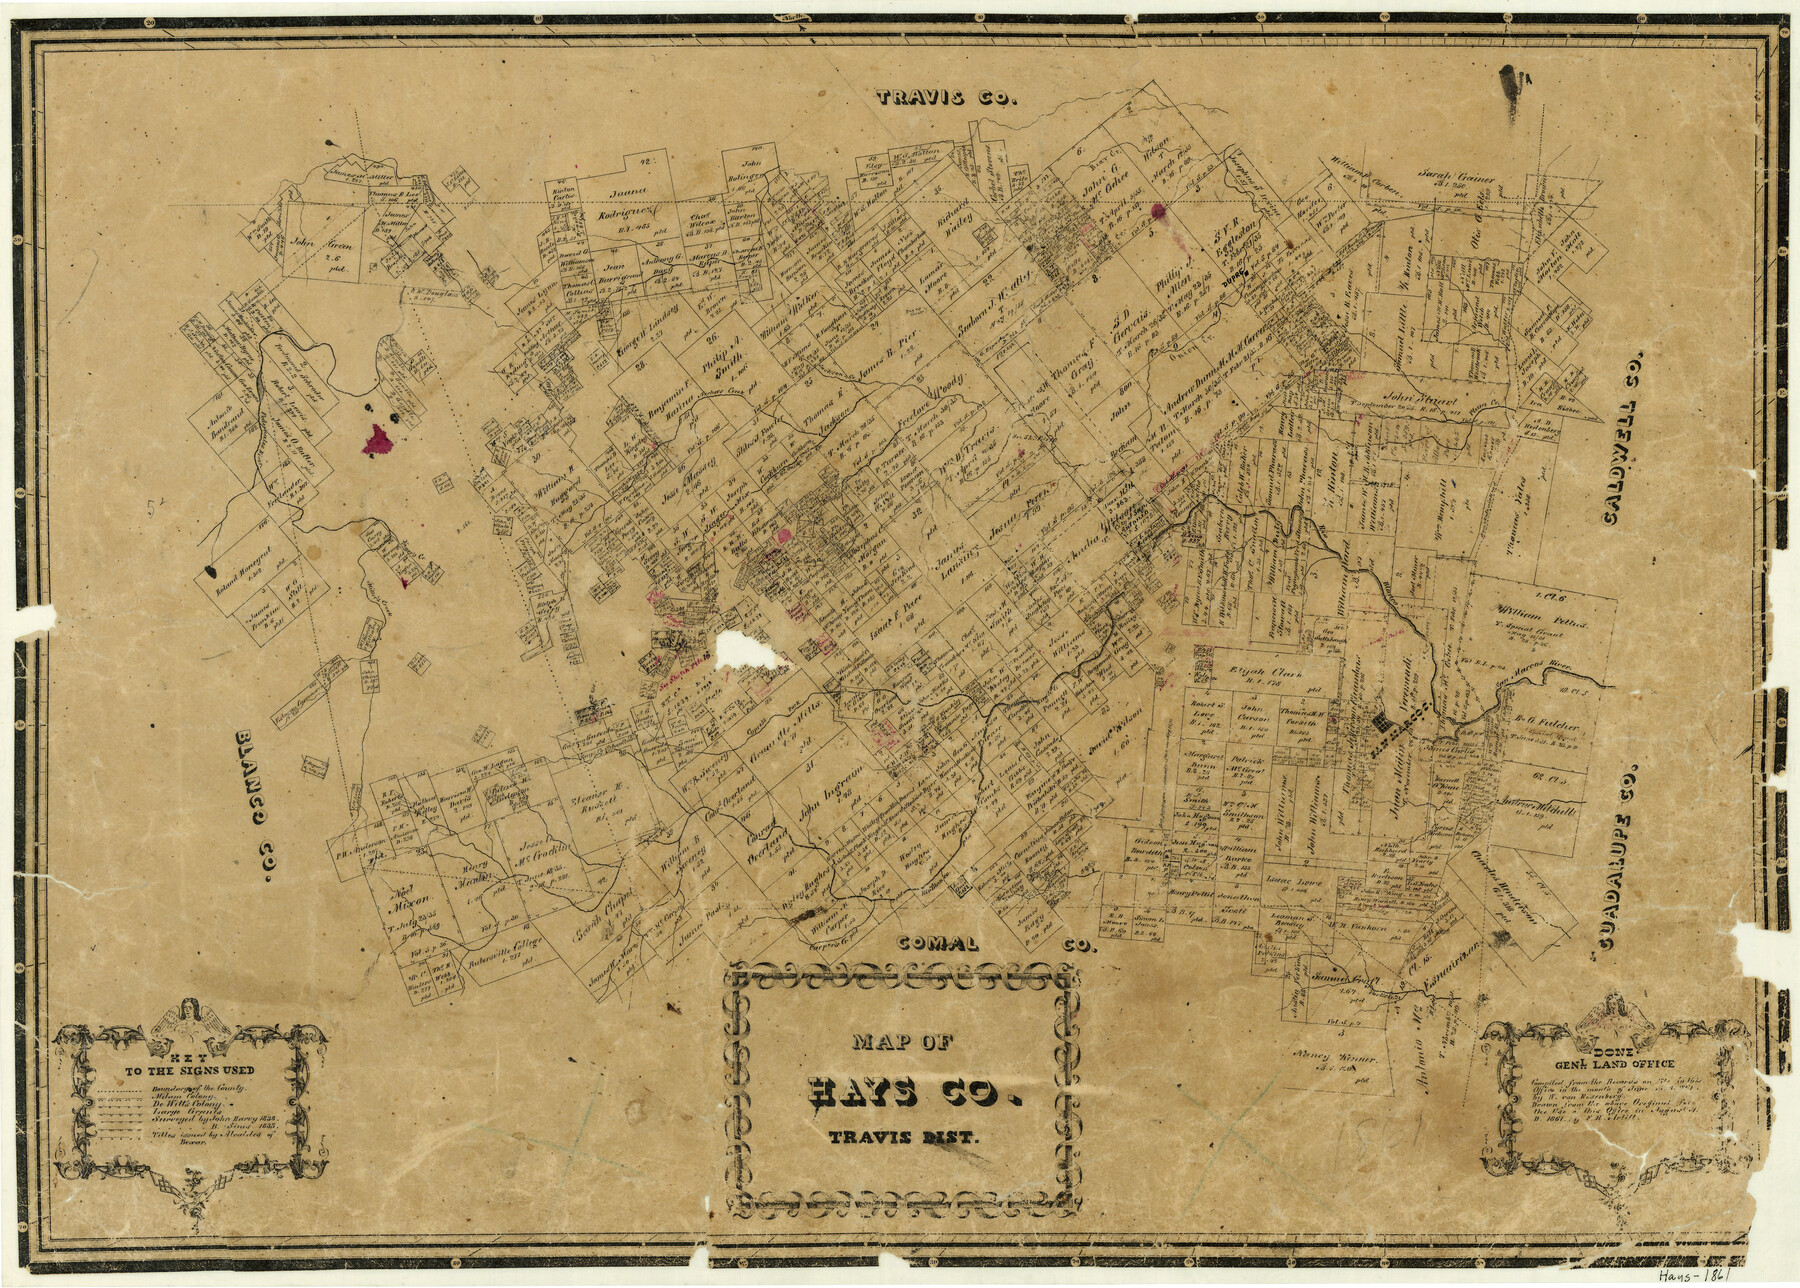 3648, Map of Hays County Travis District, General Map Collection